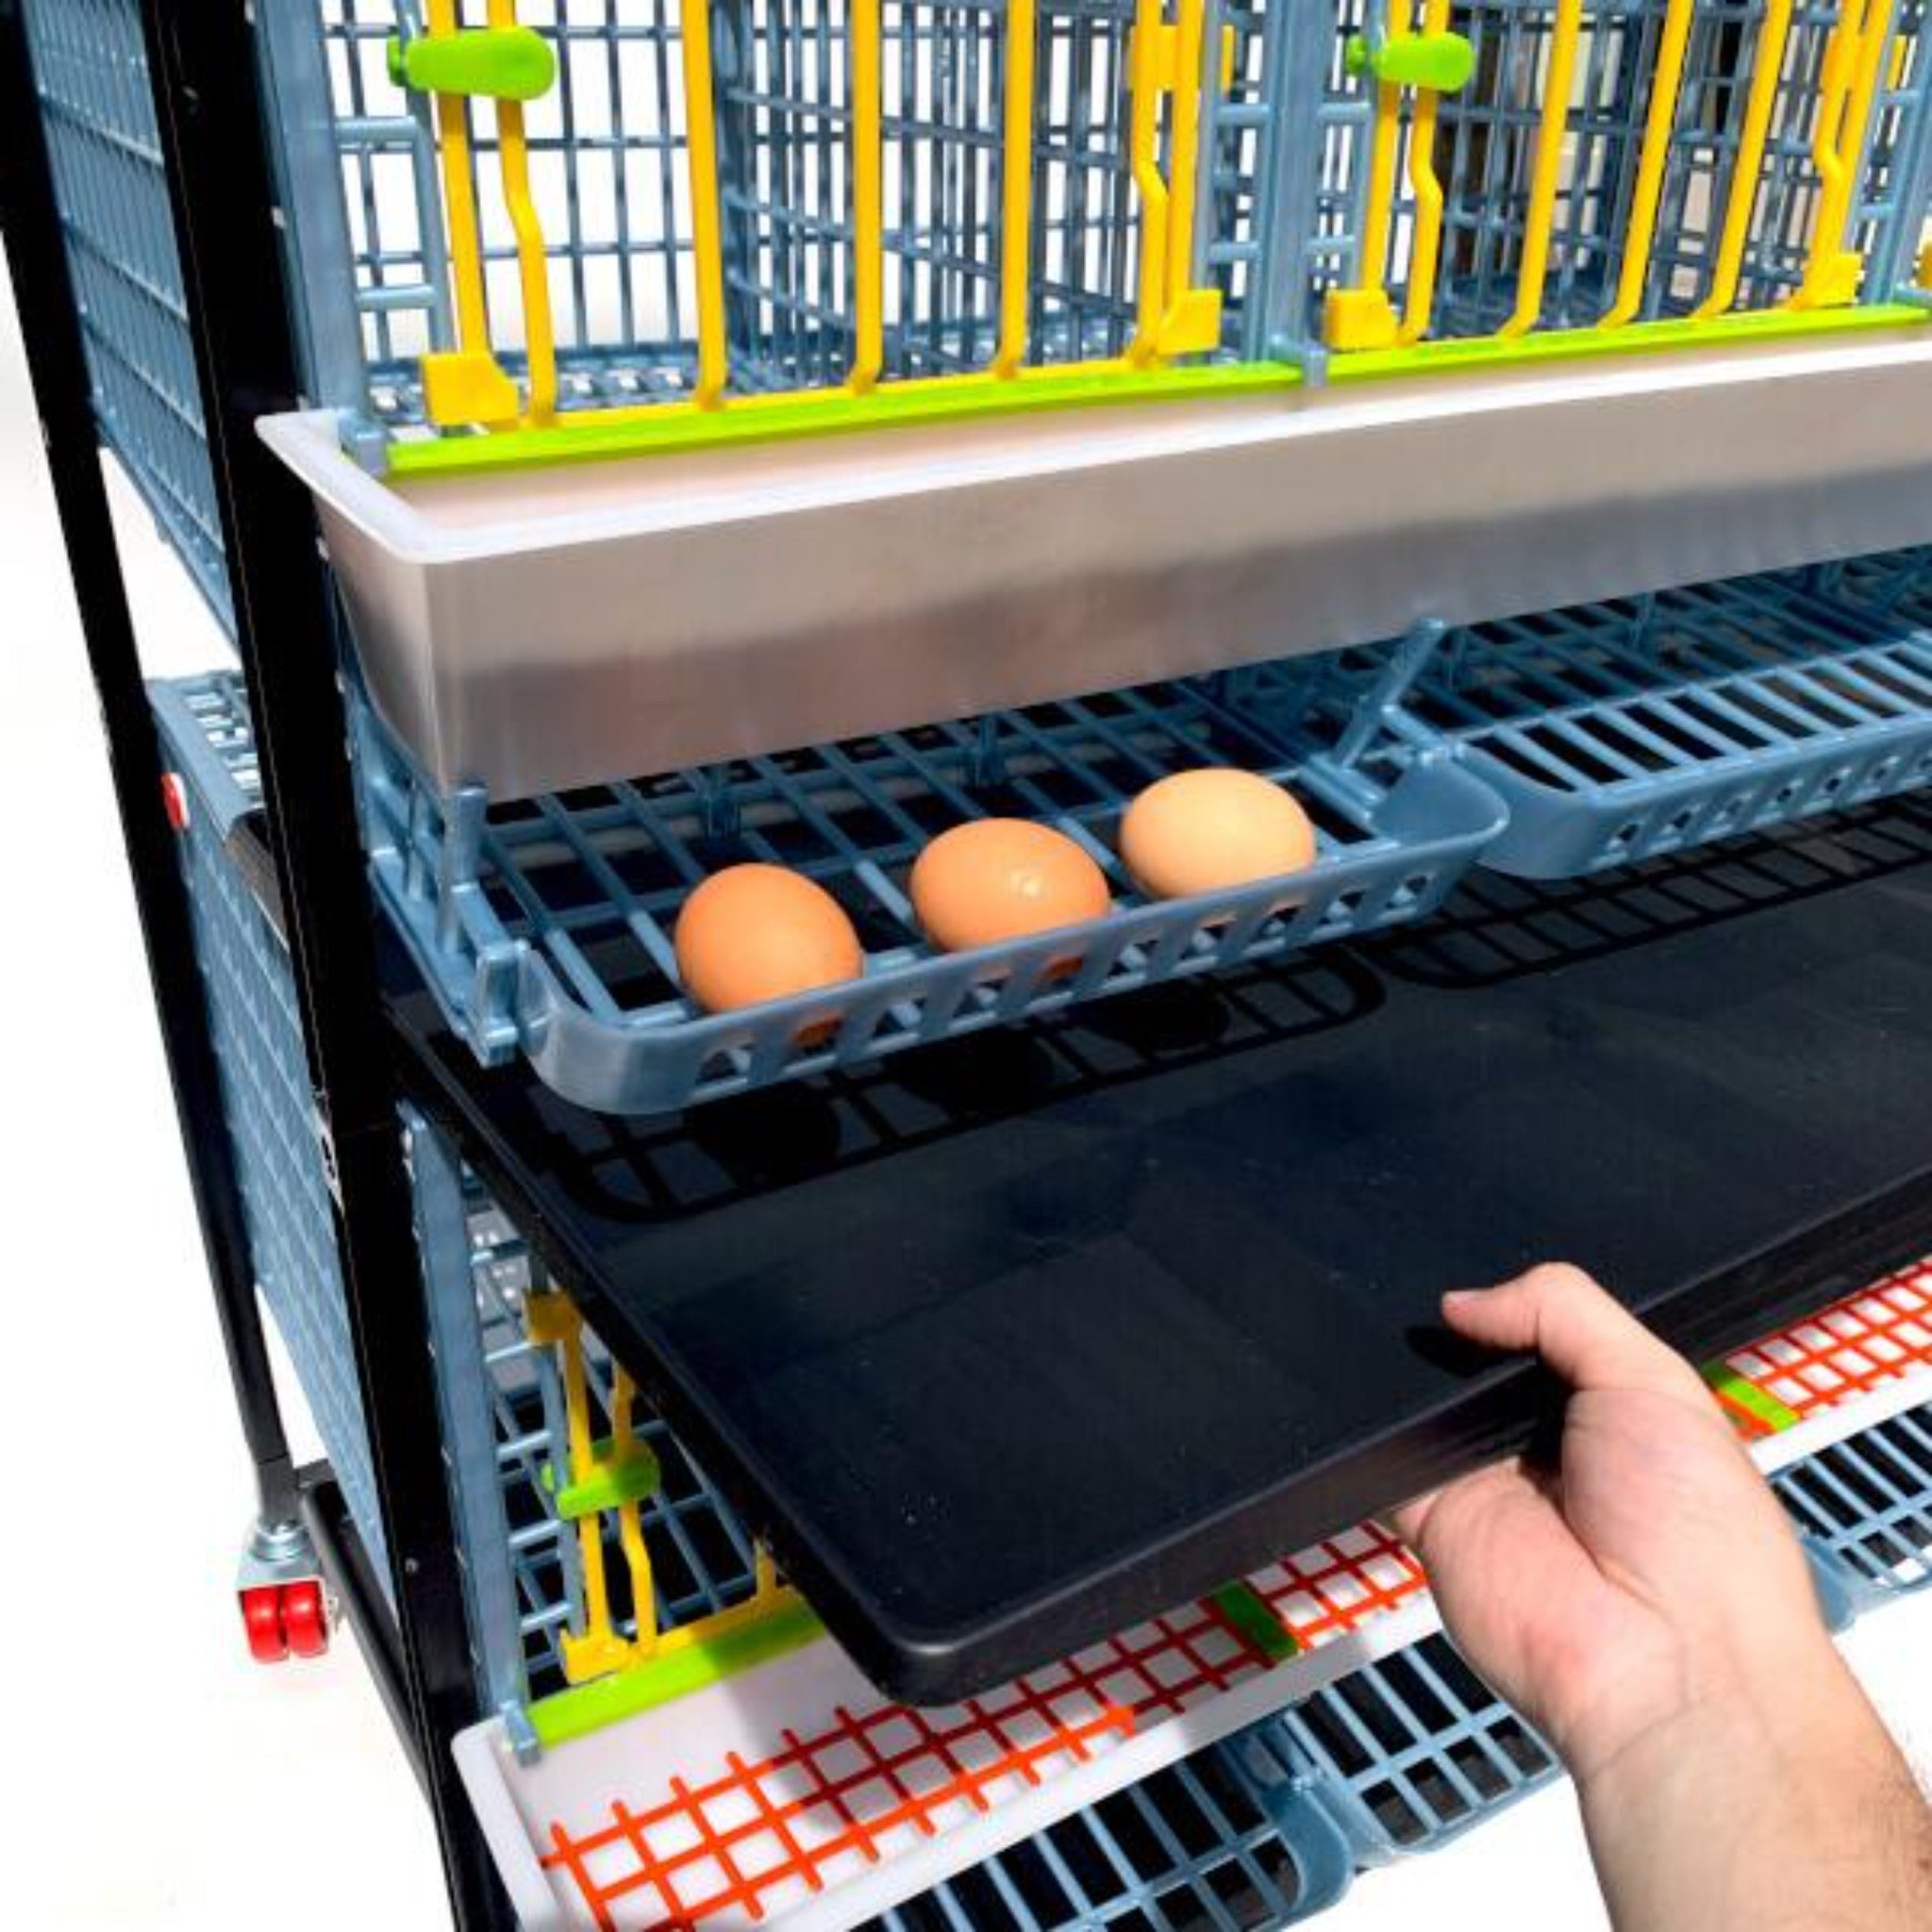 Hatching Time Cimuka. TYK40 15” Chicken cage 2 layer. Image shows chicken cage from front. Close up view shows a hand removing the manure tray. 3 eggs are in roll out egg tray for easy egg collection.